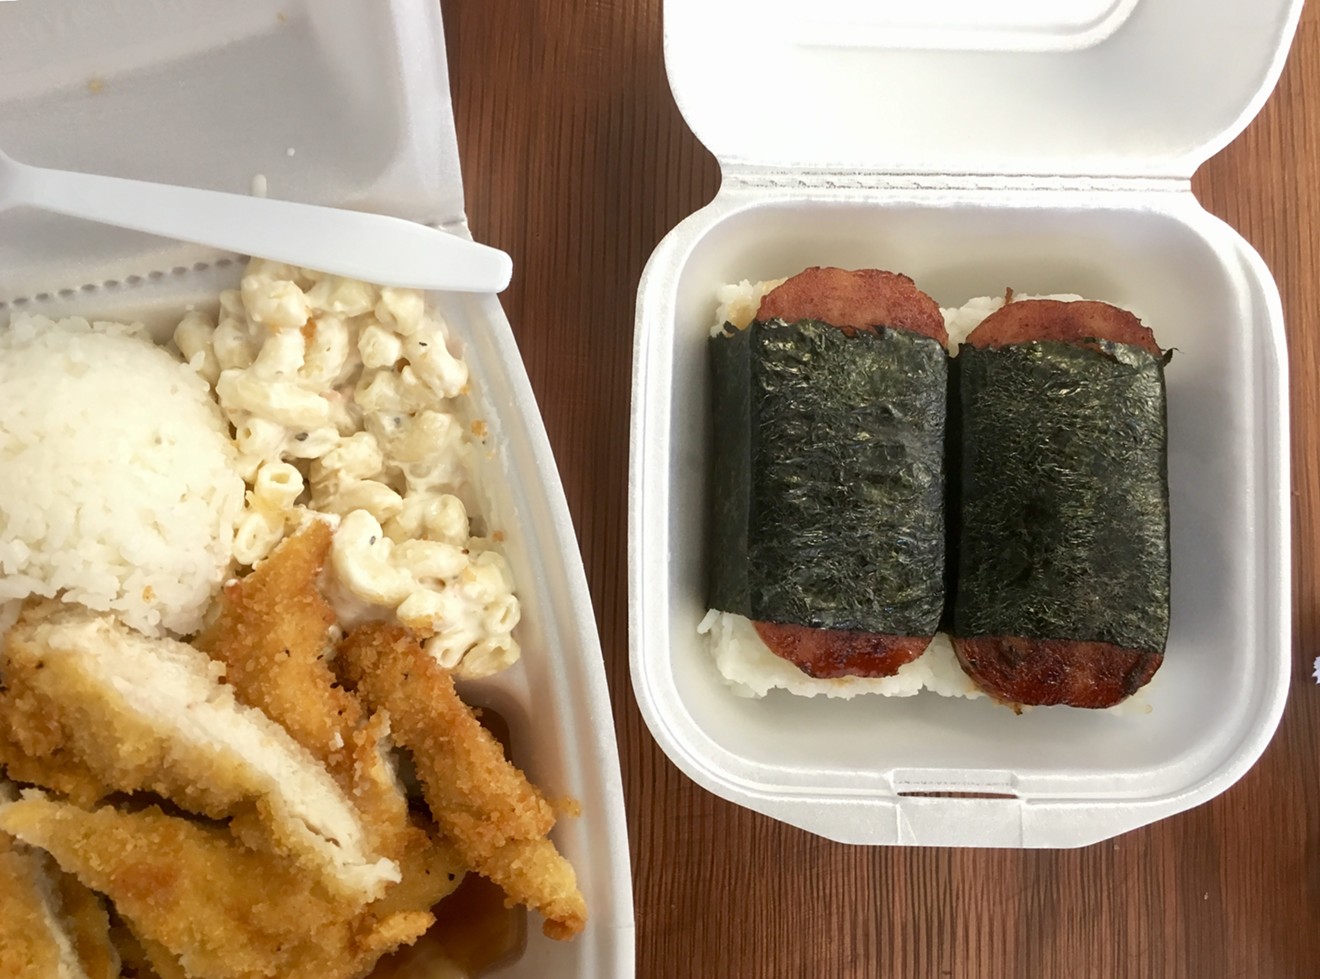 Spam musubi ($4.99 for two), soy-painted Spam grilled and wrapped like sushi, and crunchy chicken katsu ($8.59).